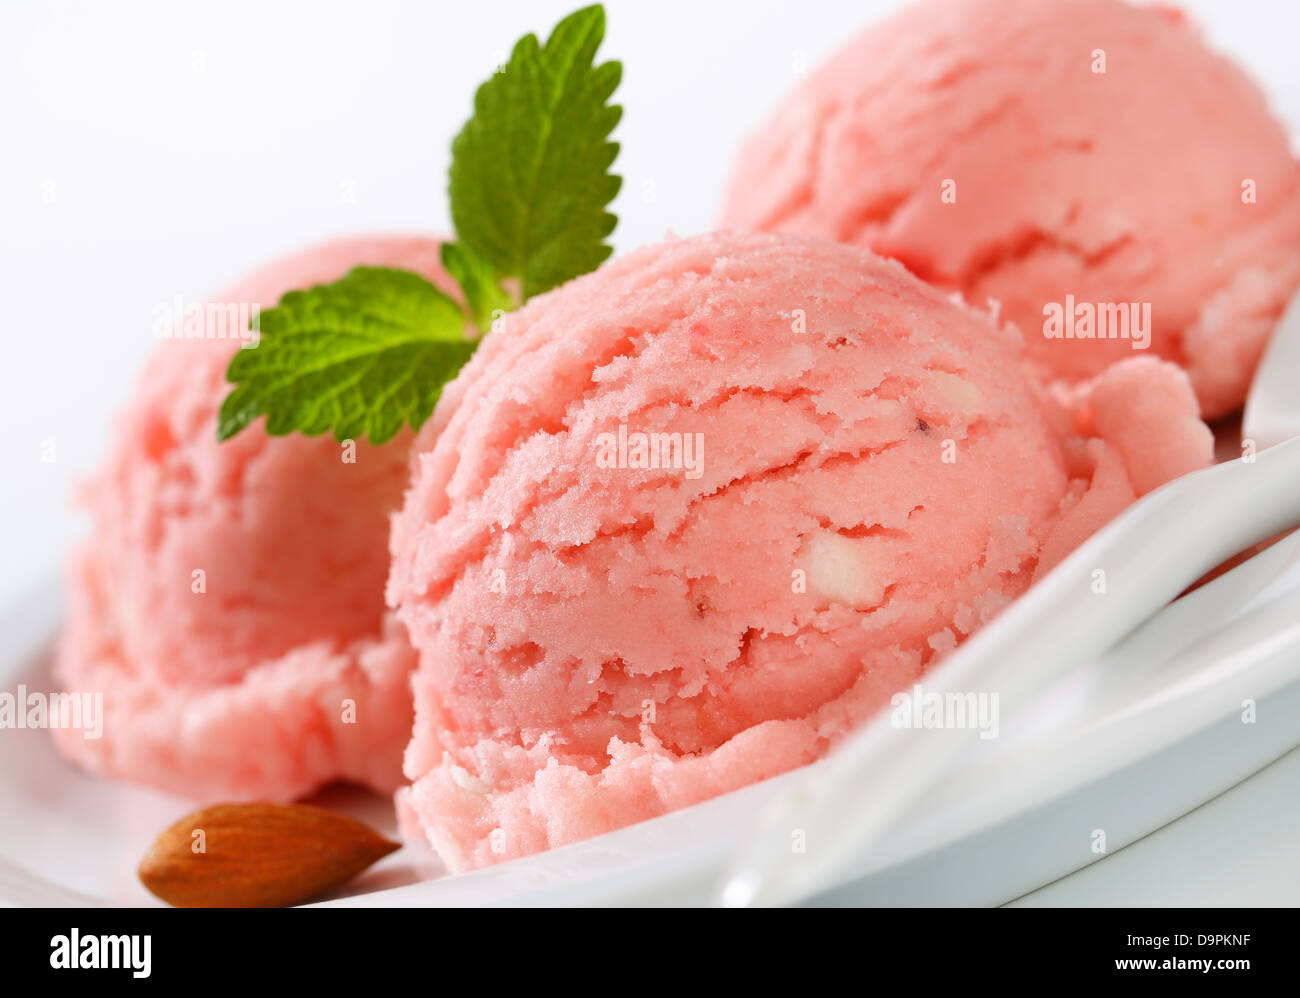 Scoops of pink fruit sherbet Stock Photo - Alamy